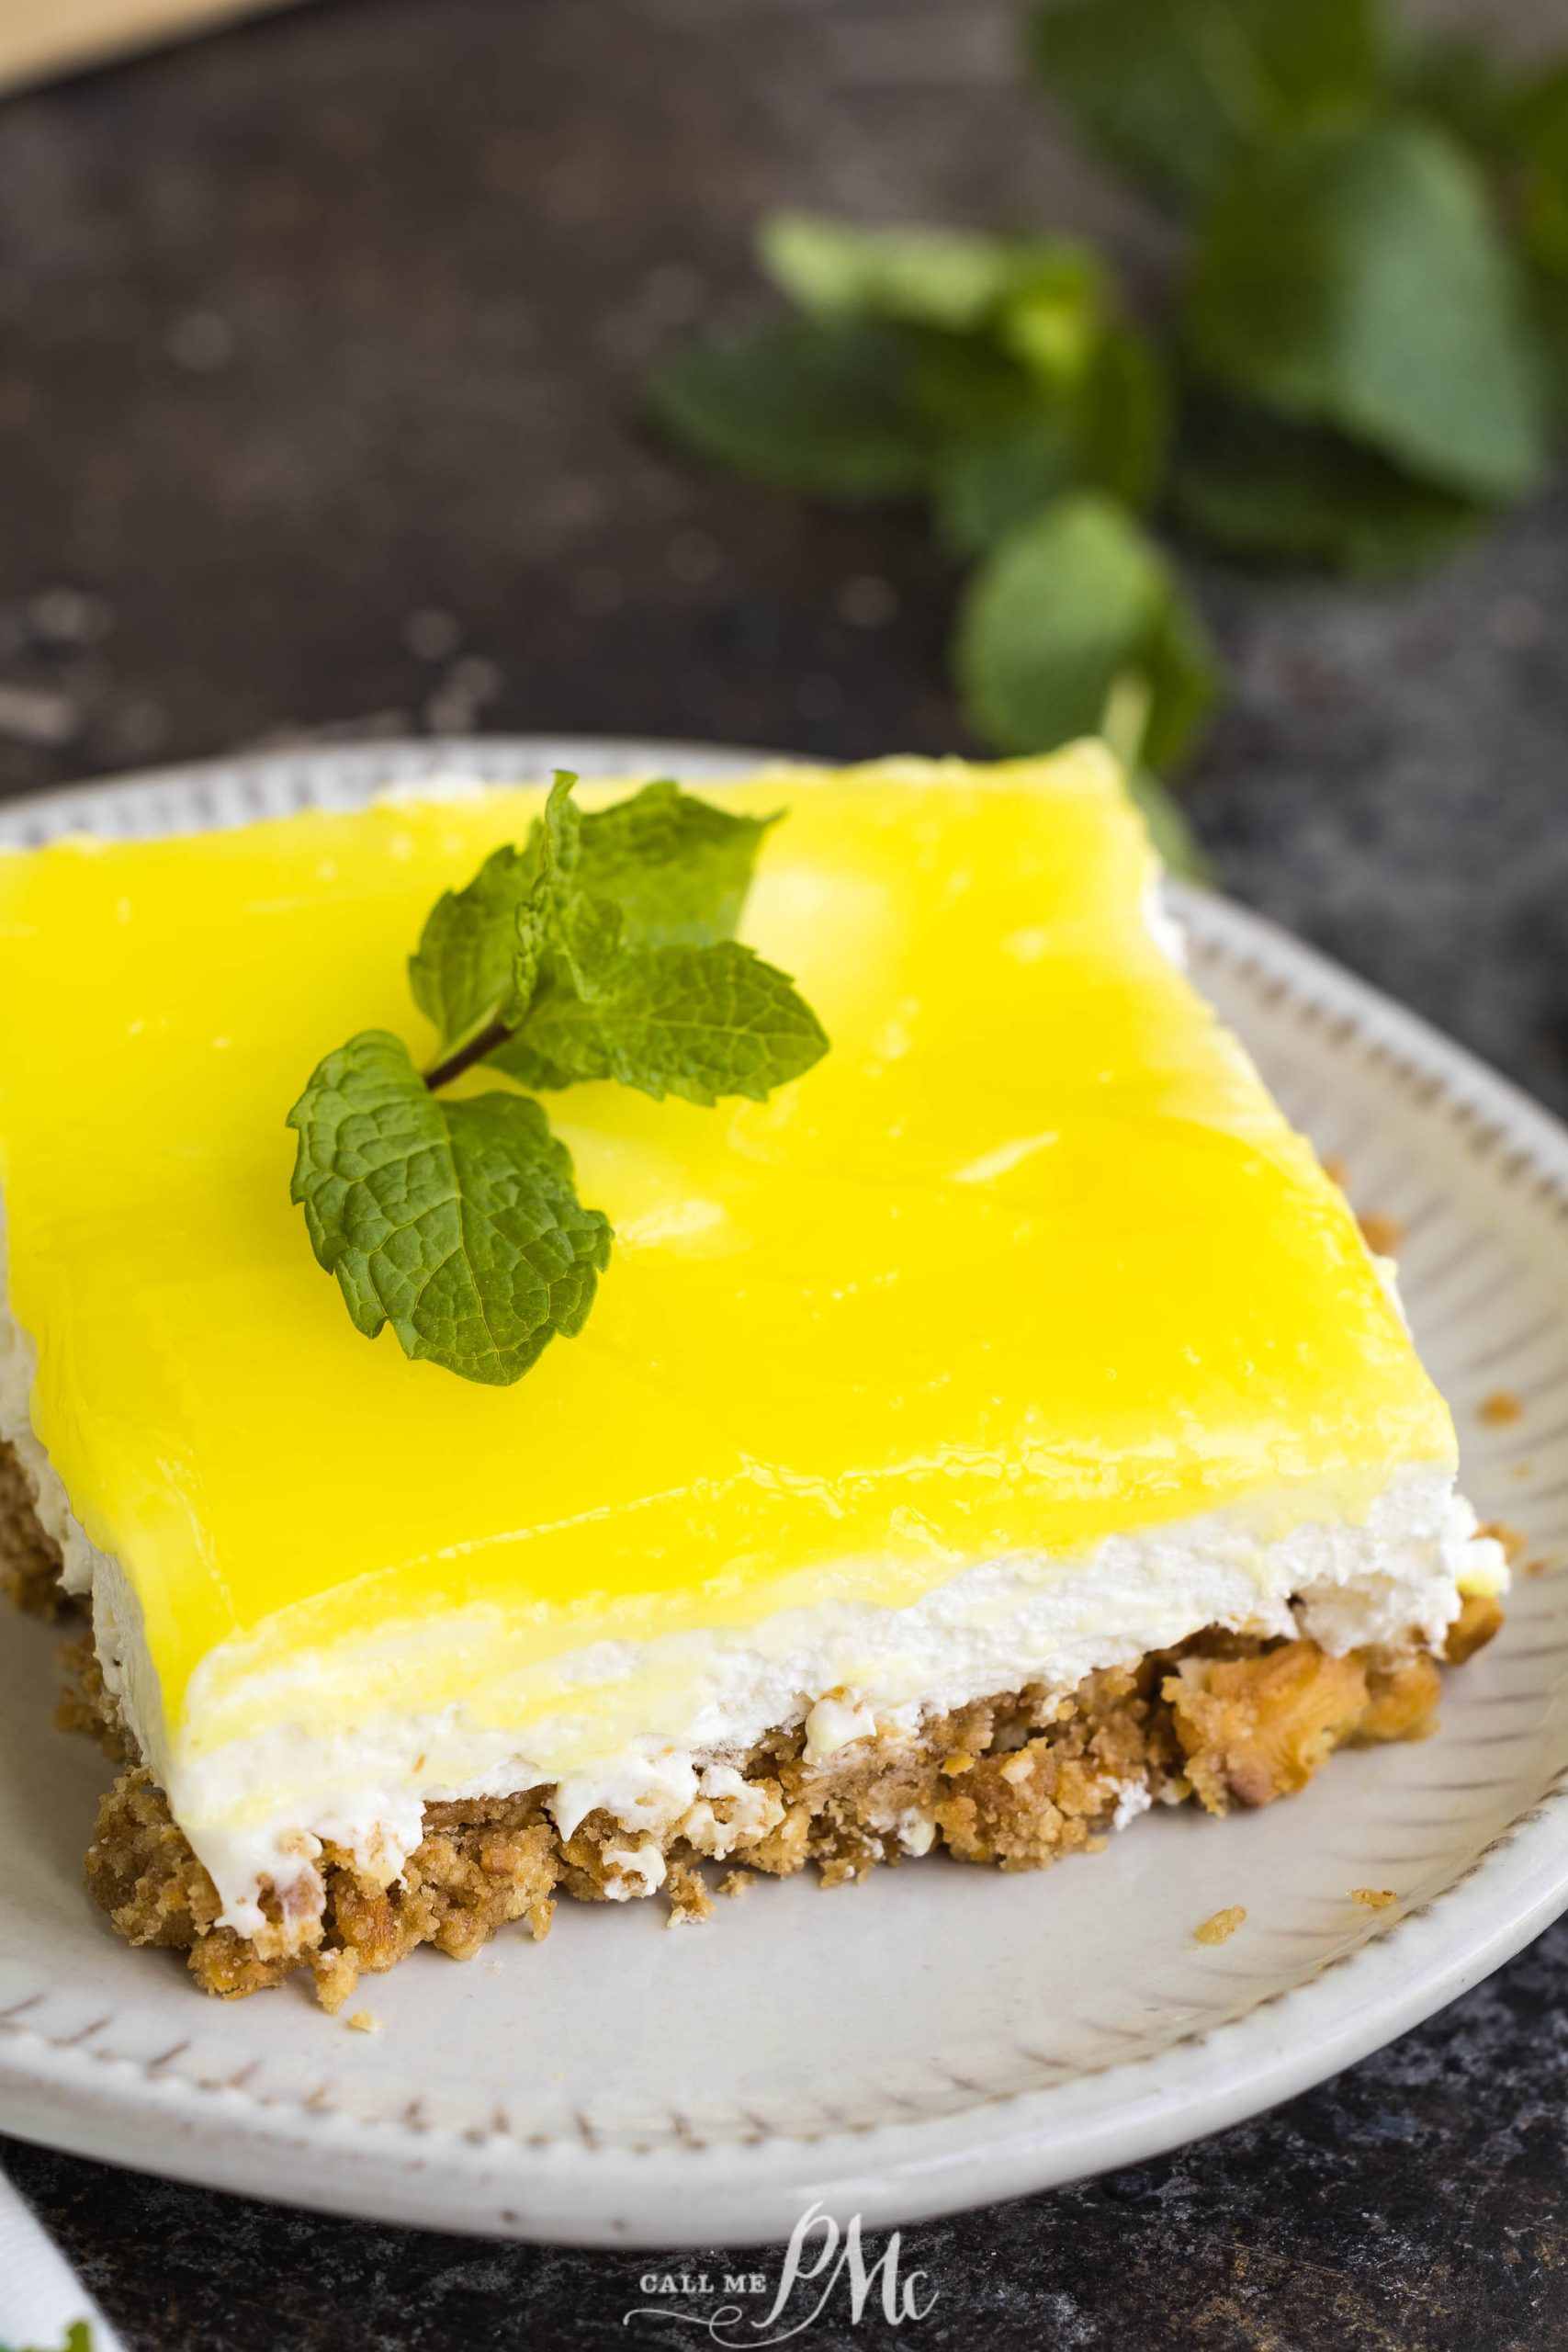 A slice of lemon cheesecake on a plate.